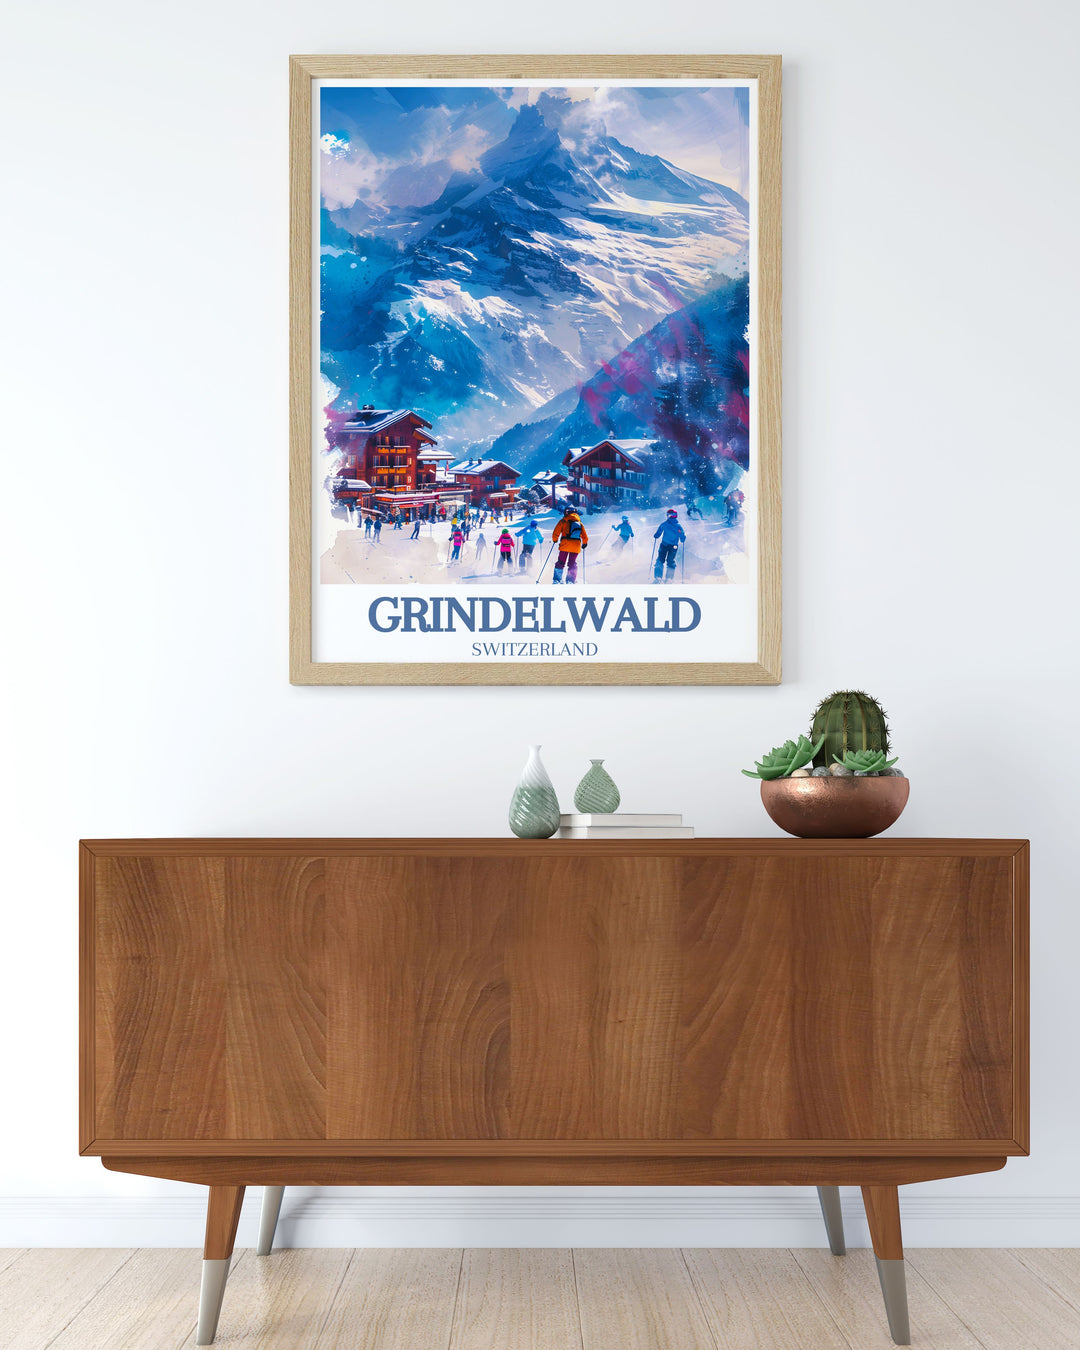 Highlighting the rich history of Grindelwald Ski Resort, this poster captures the charm and elegance of this iconic alpine destination, making it a timeless addition to your home decor.